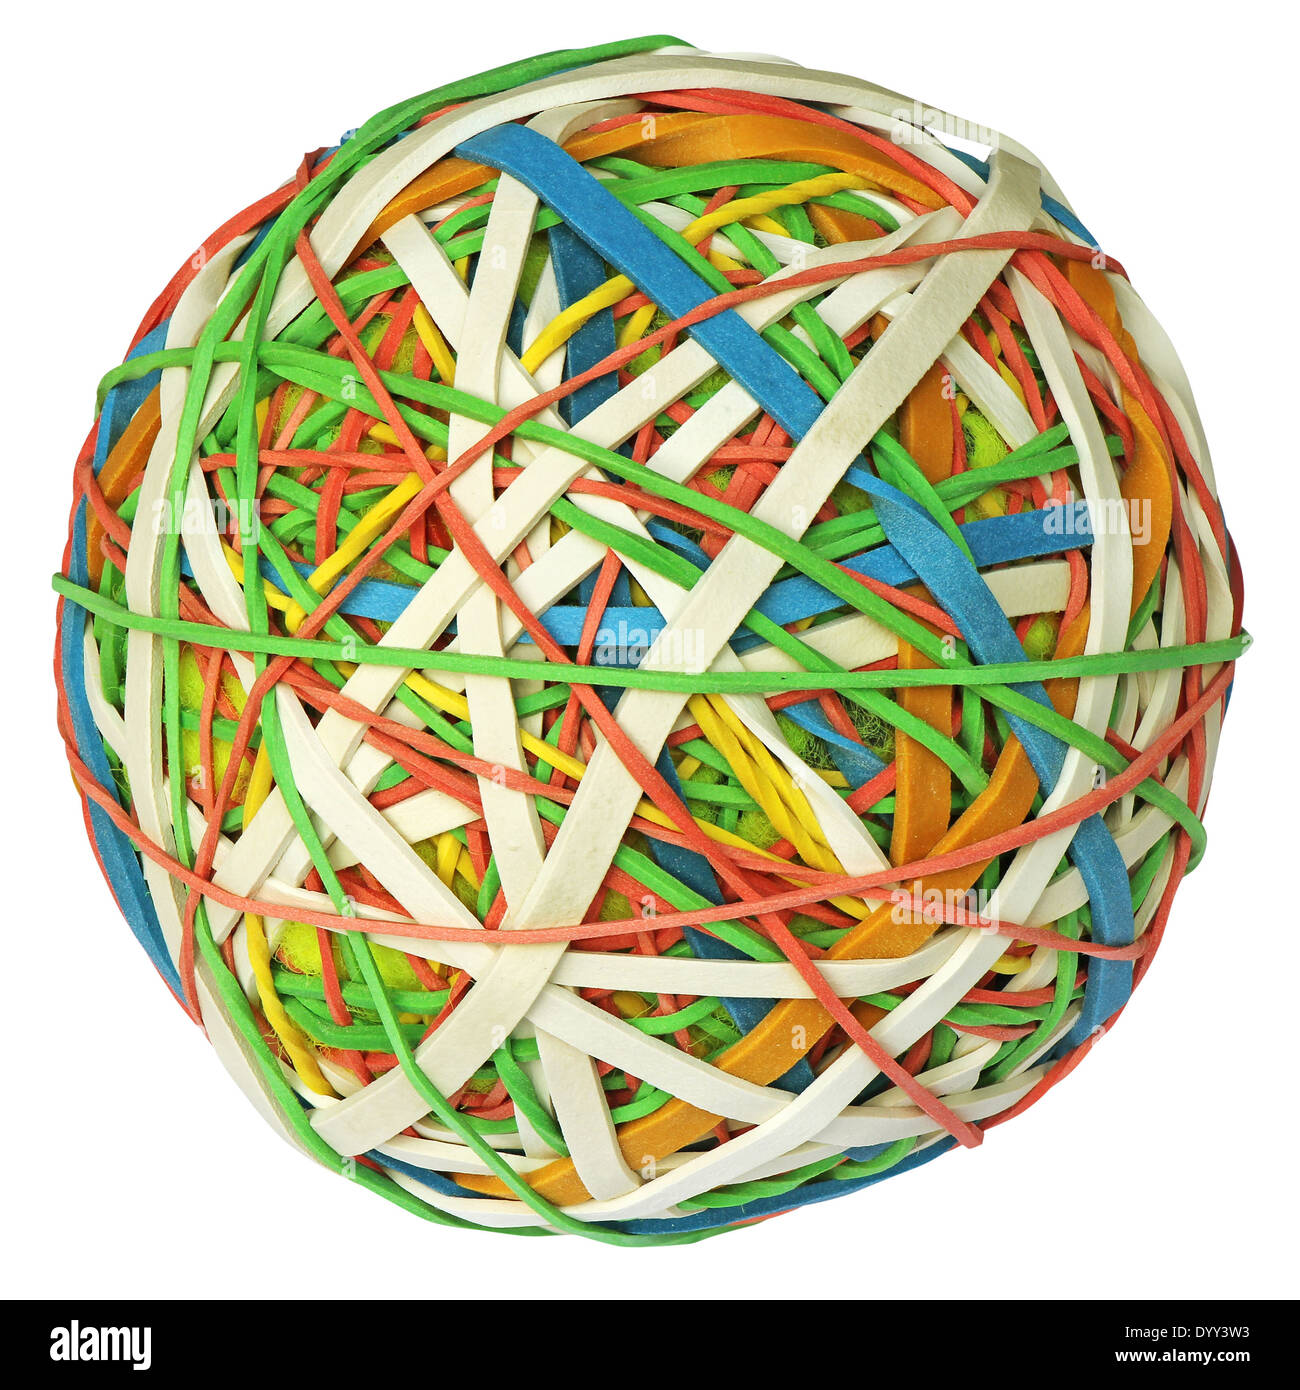 Colorful rubber band ball isolated with clipping path on white background Stock Photo